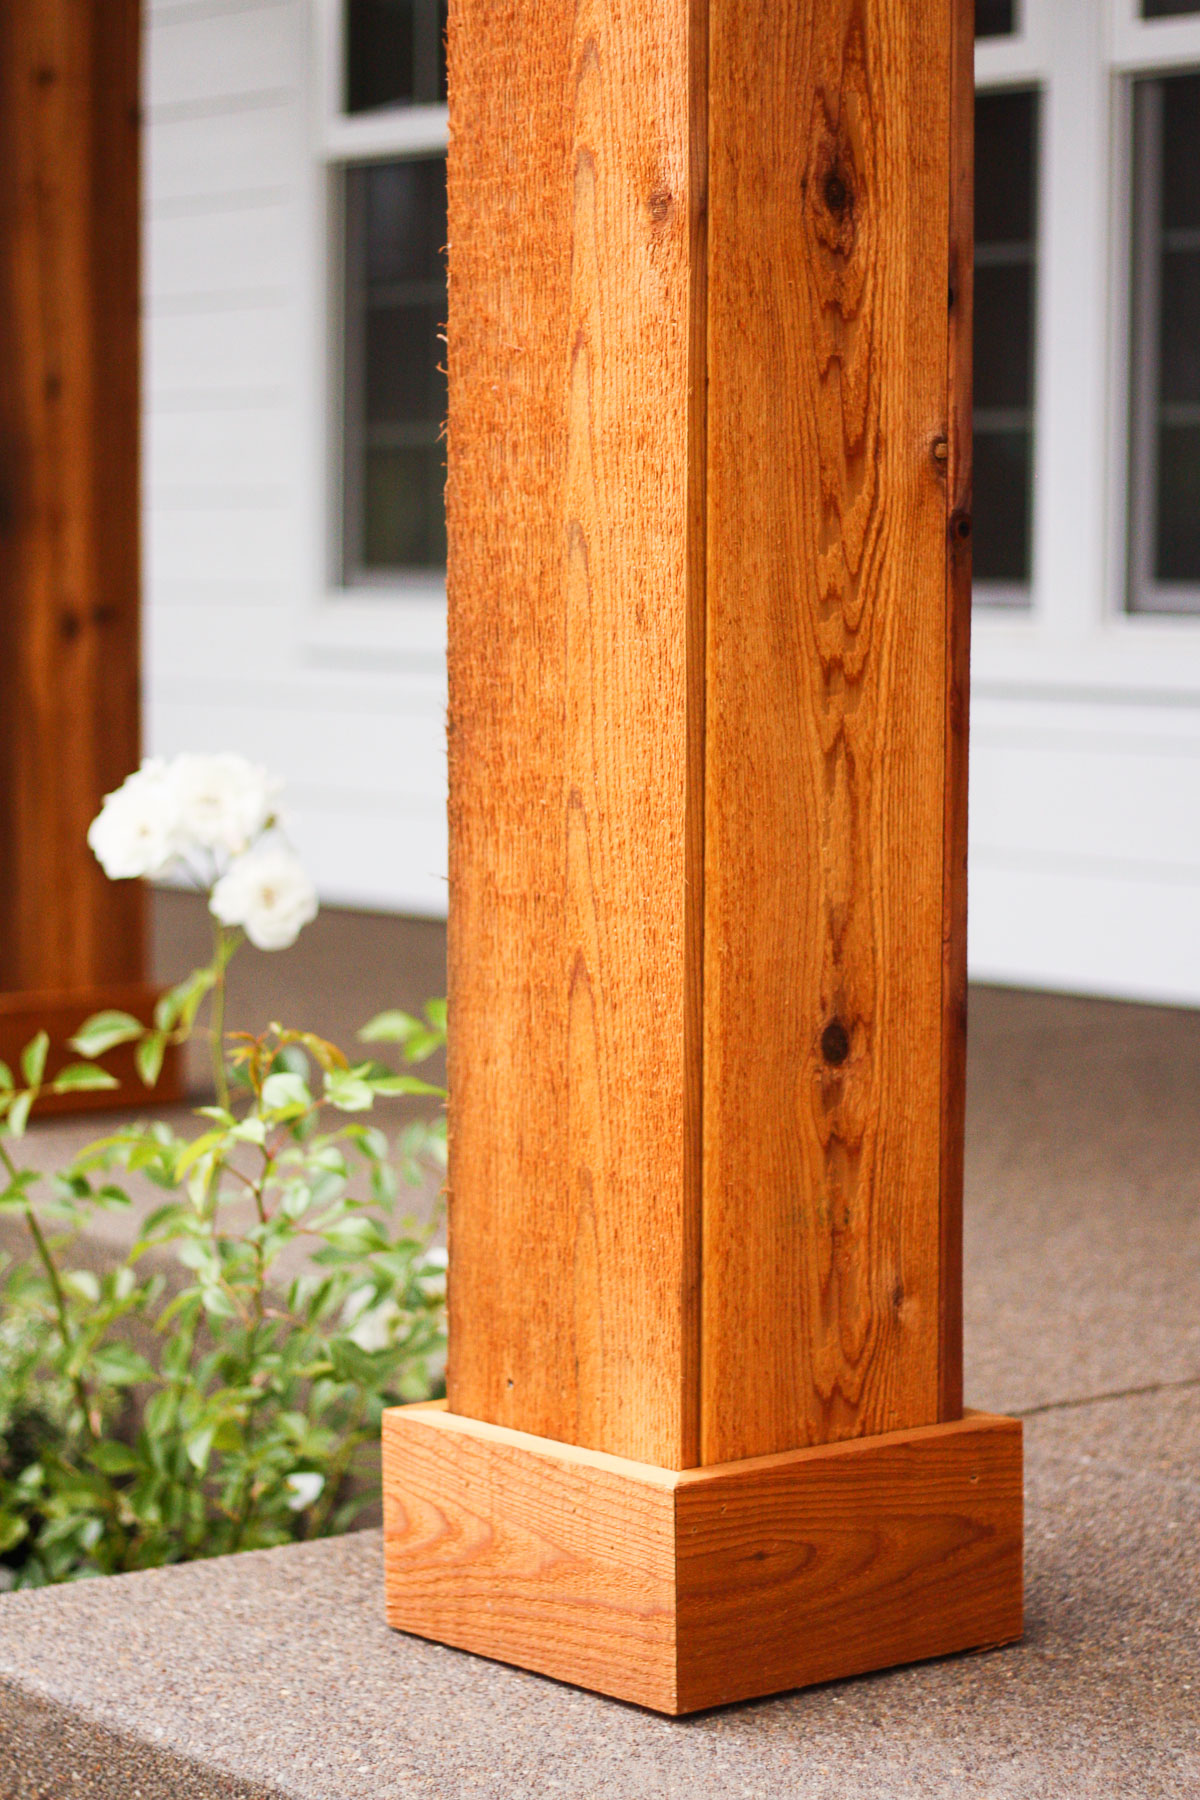 We turned the plain white front porch pillars into cedar pillars, and our porch has never looked better.